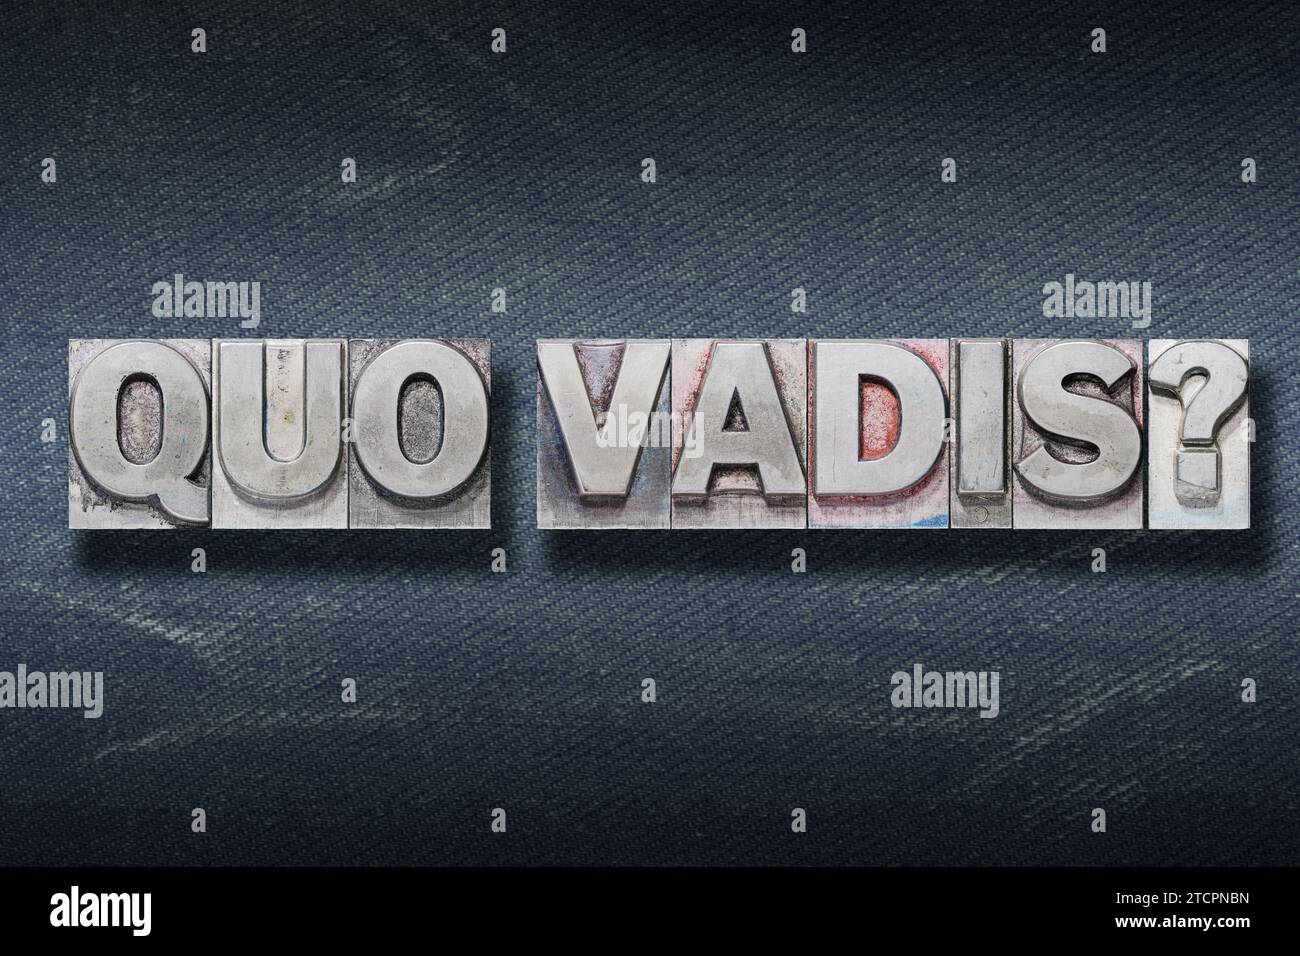 quo vadis (where are you going) question made from metallic letterpress on dark jeans background Stock Photo